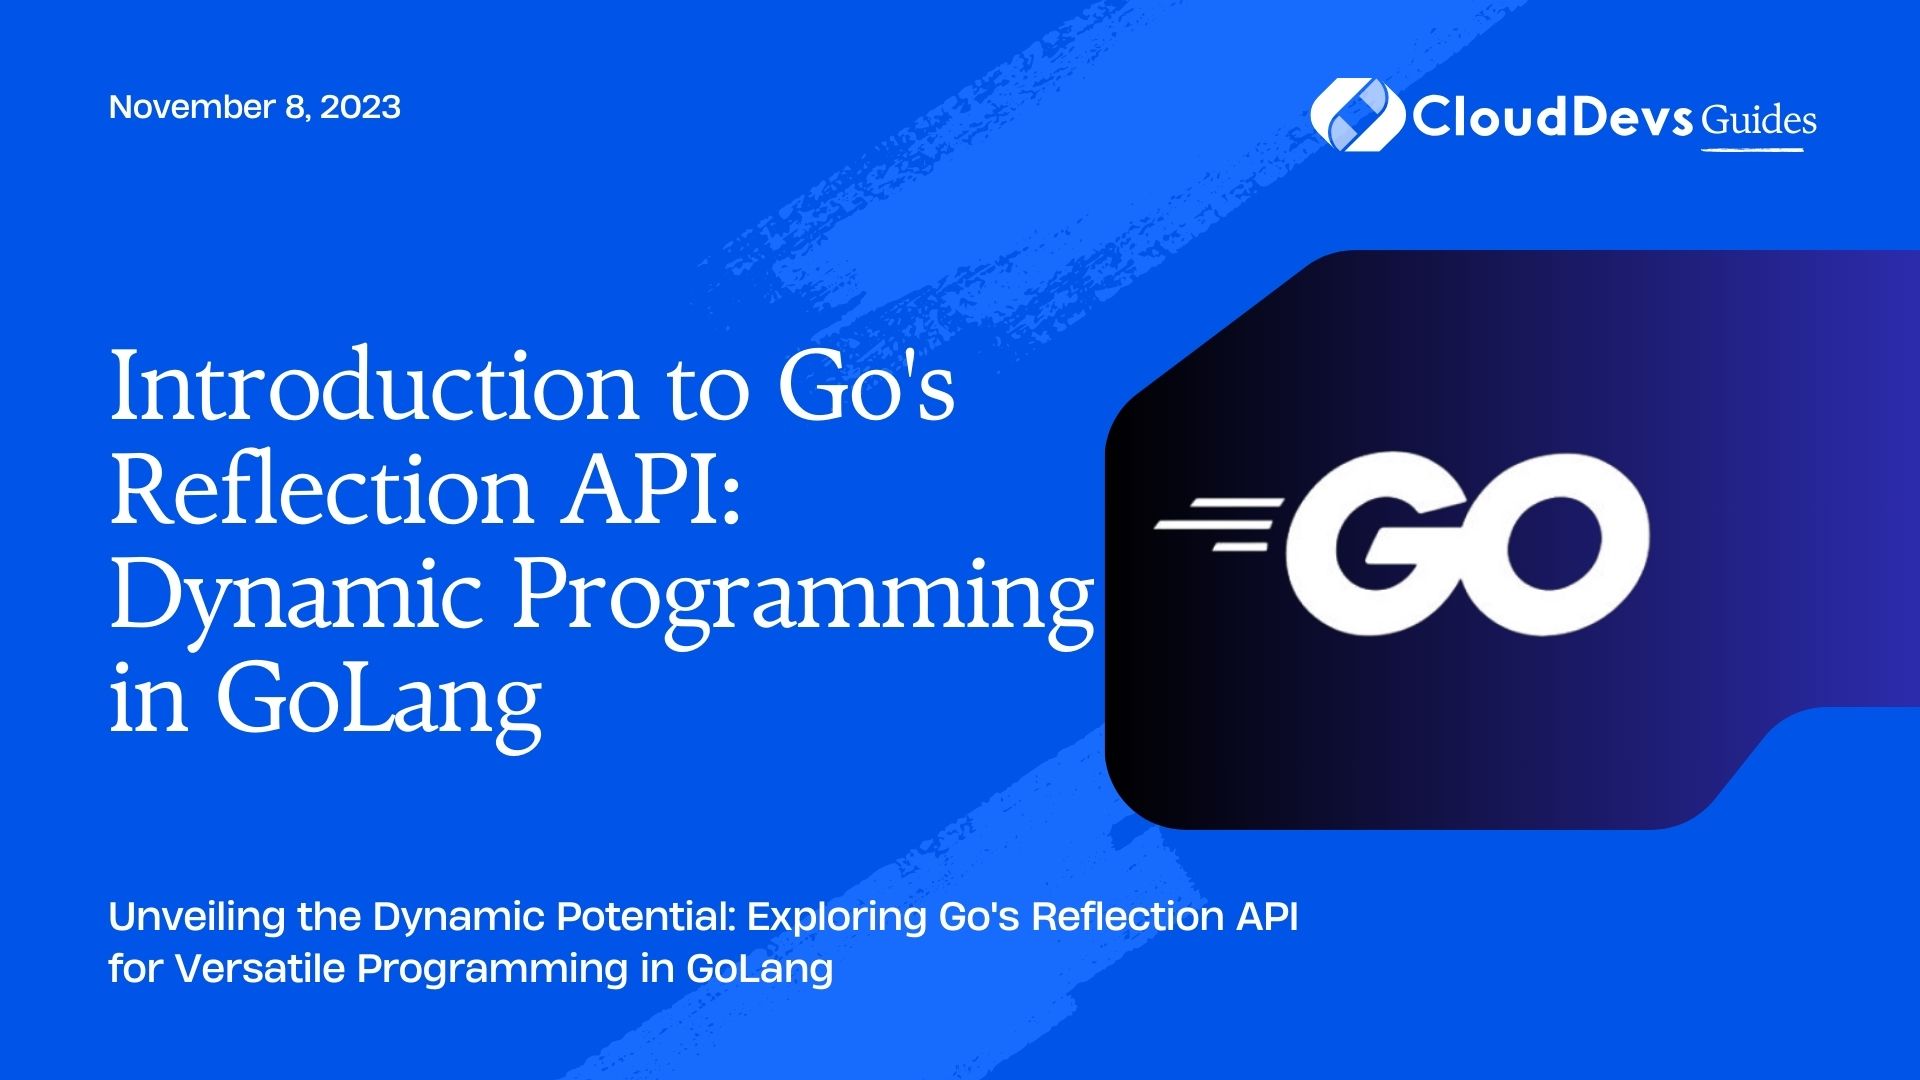 Introduction to Go's Reflection API: Dynamic Programming in GoLang